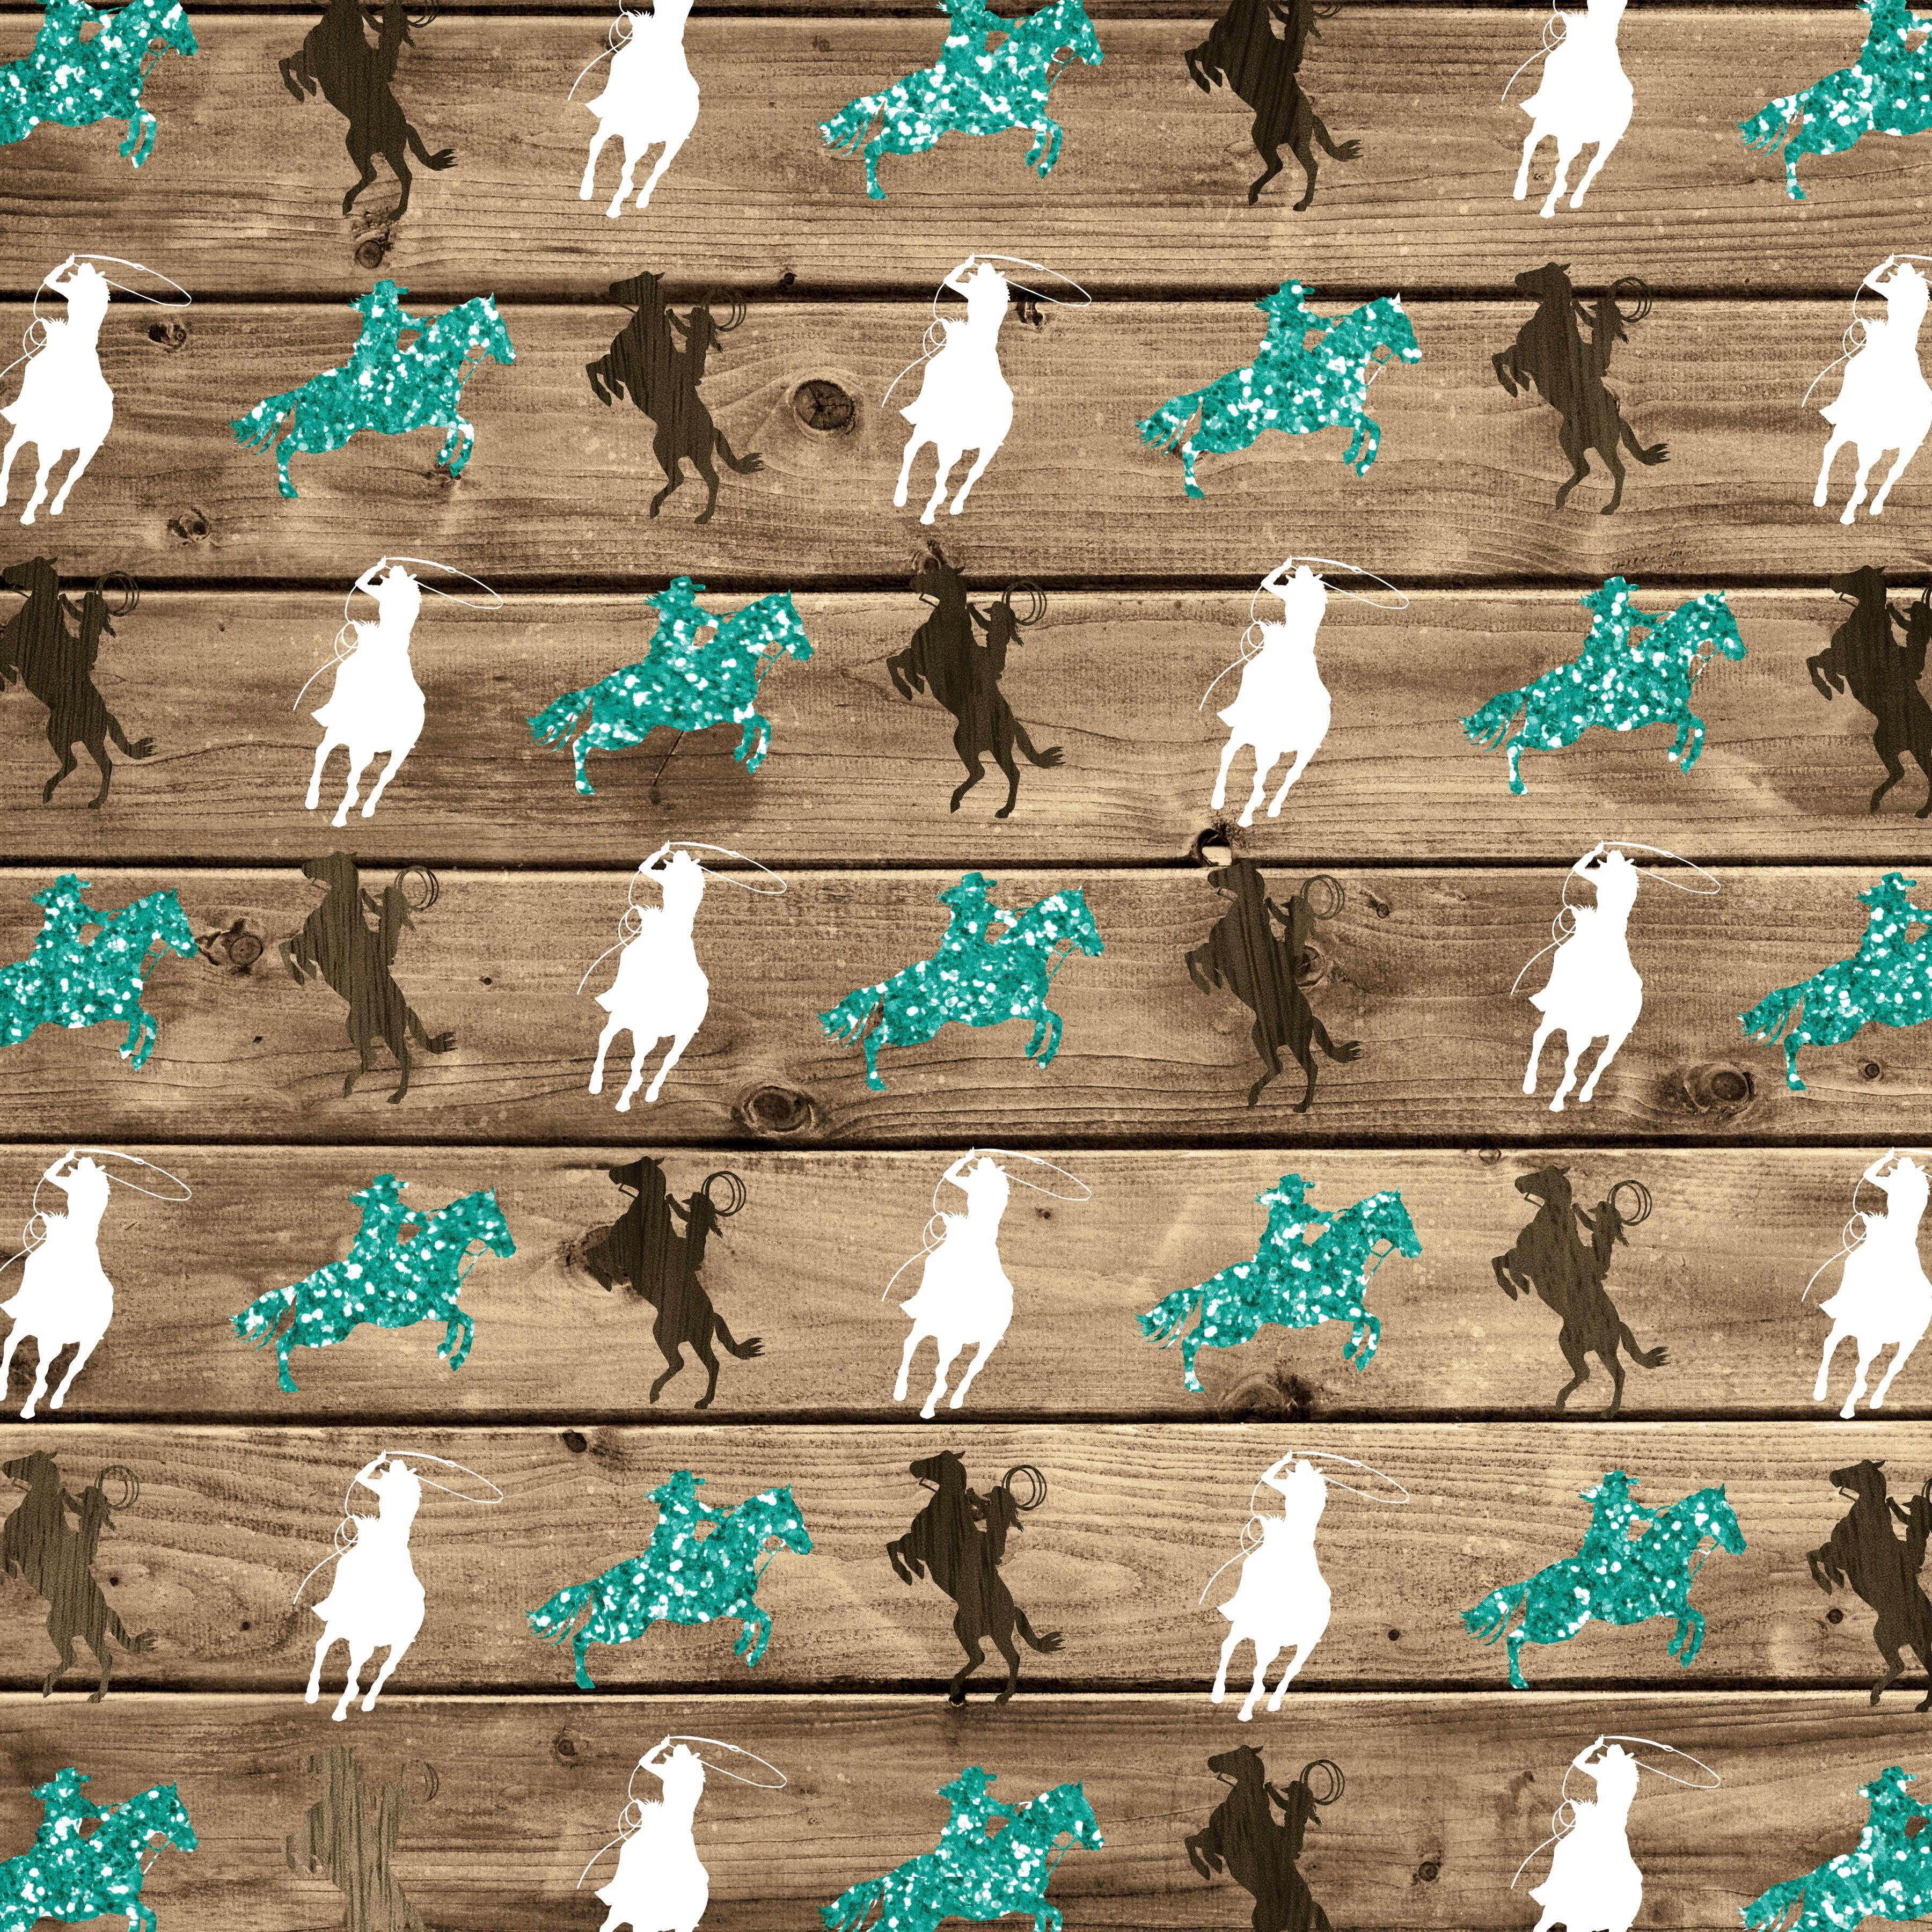 Cowgirls Collection Saddle Up 12 x 12 Double-Sided Scrapbook Paper by SSC Designs